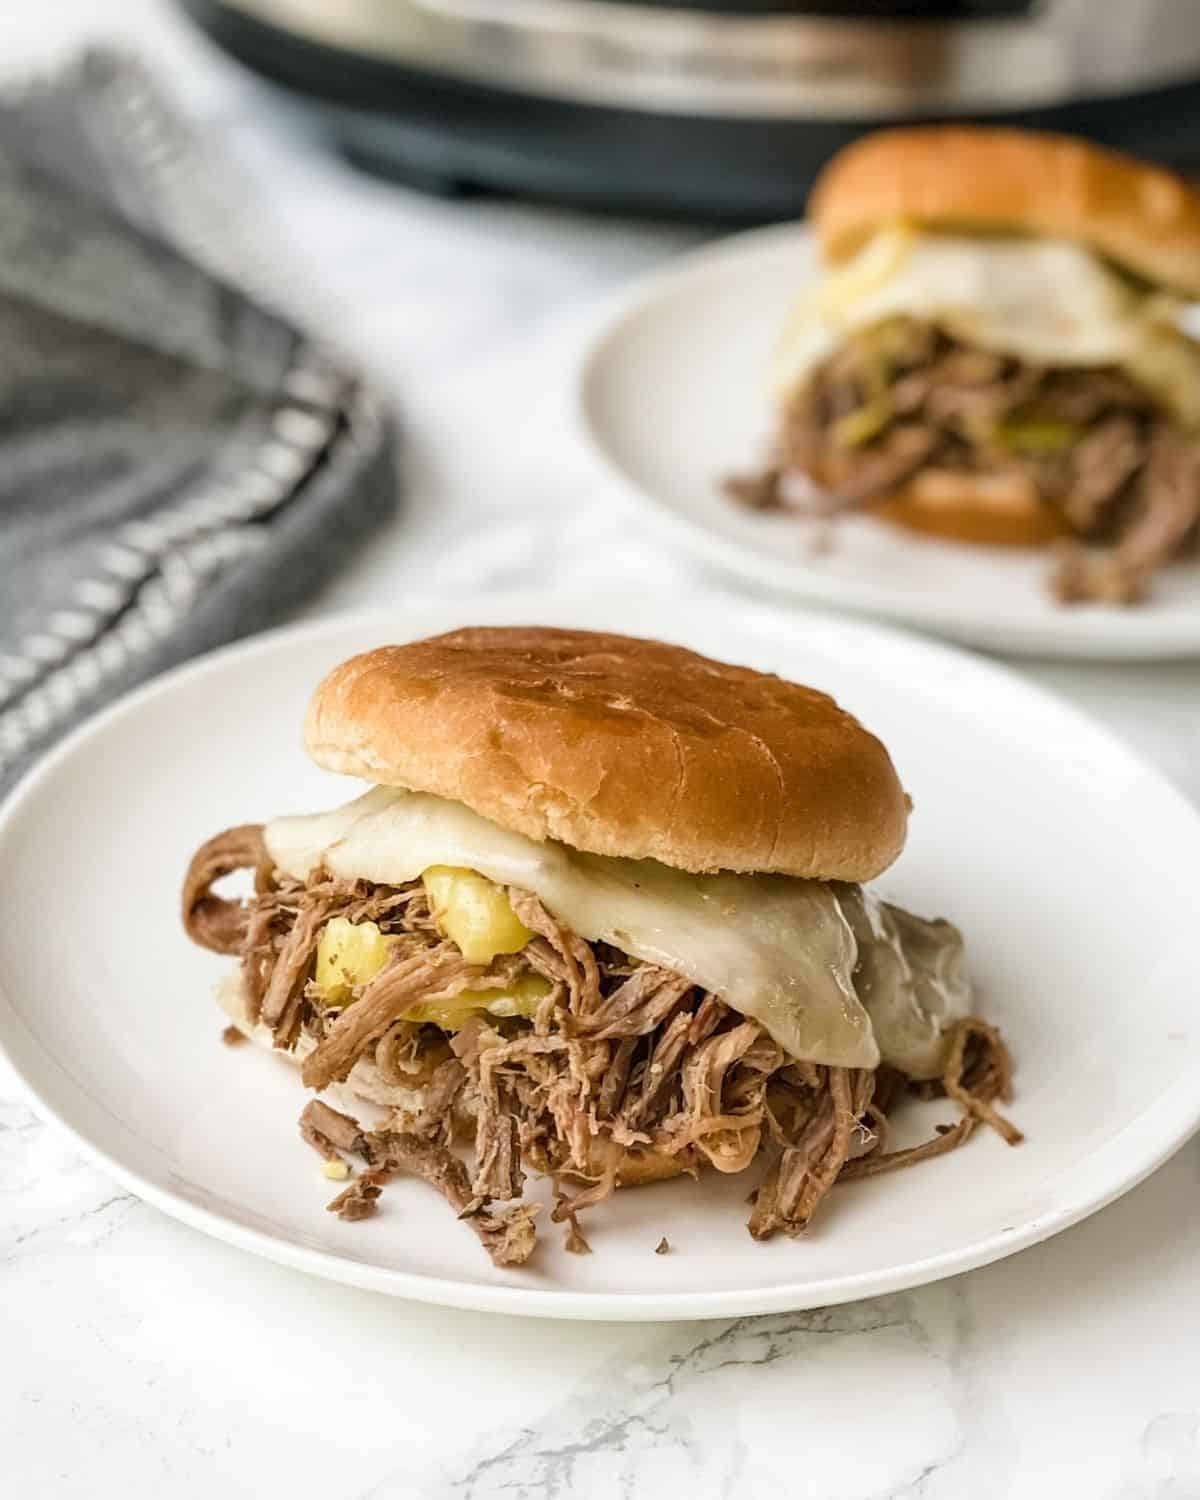 Juicy shredded Italian beef on a crusty buttery bun with melted provolone cheese.